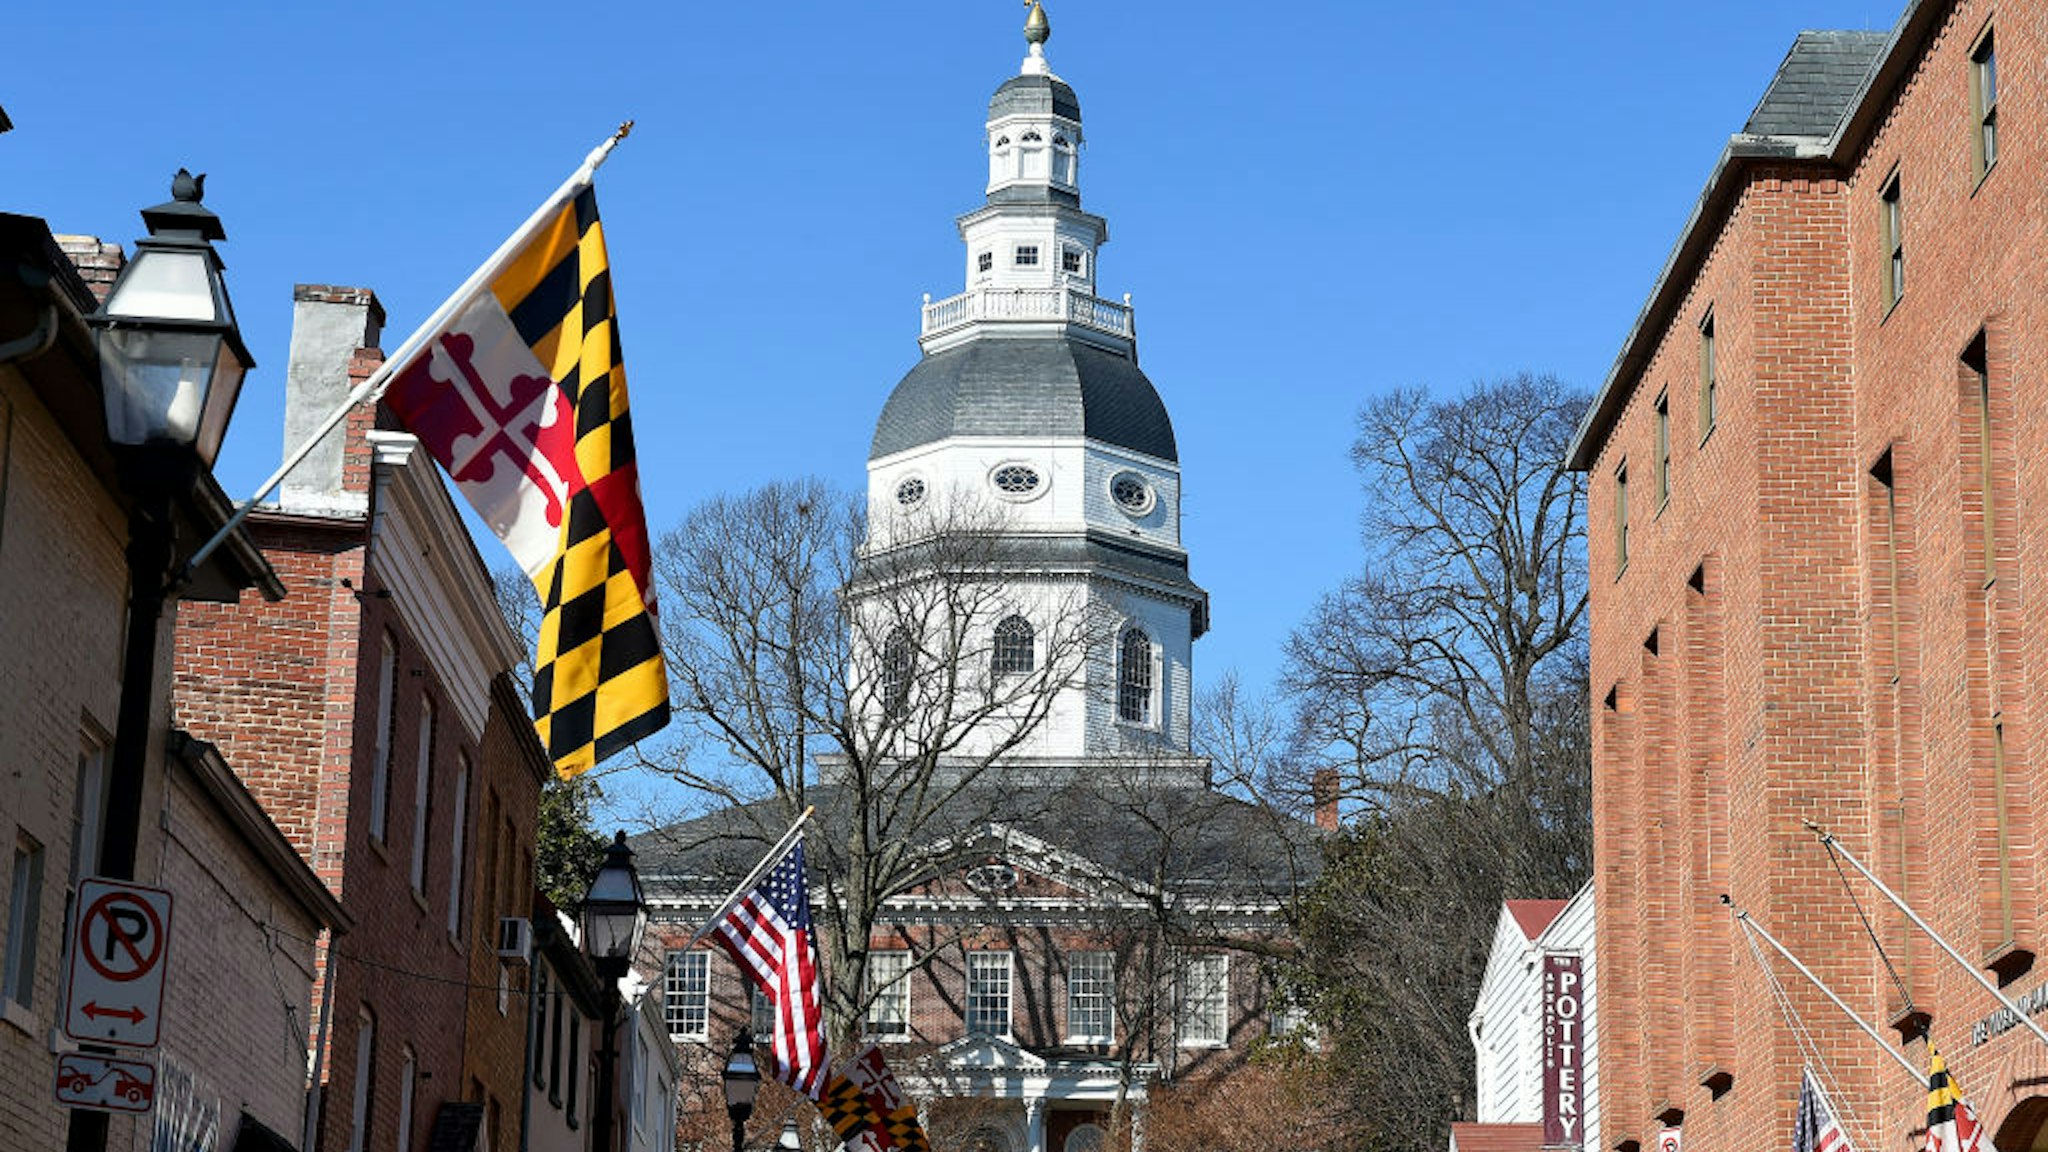 ANNAPOLIS, MD - JANUARY 13: A general view of the Maryland State House prior to the opening of the Maryland General Assembly in Annapolis, MD on January 13, 2021.